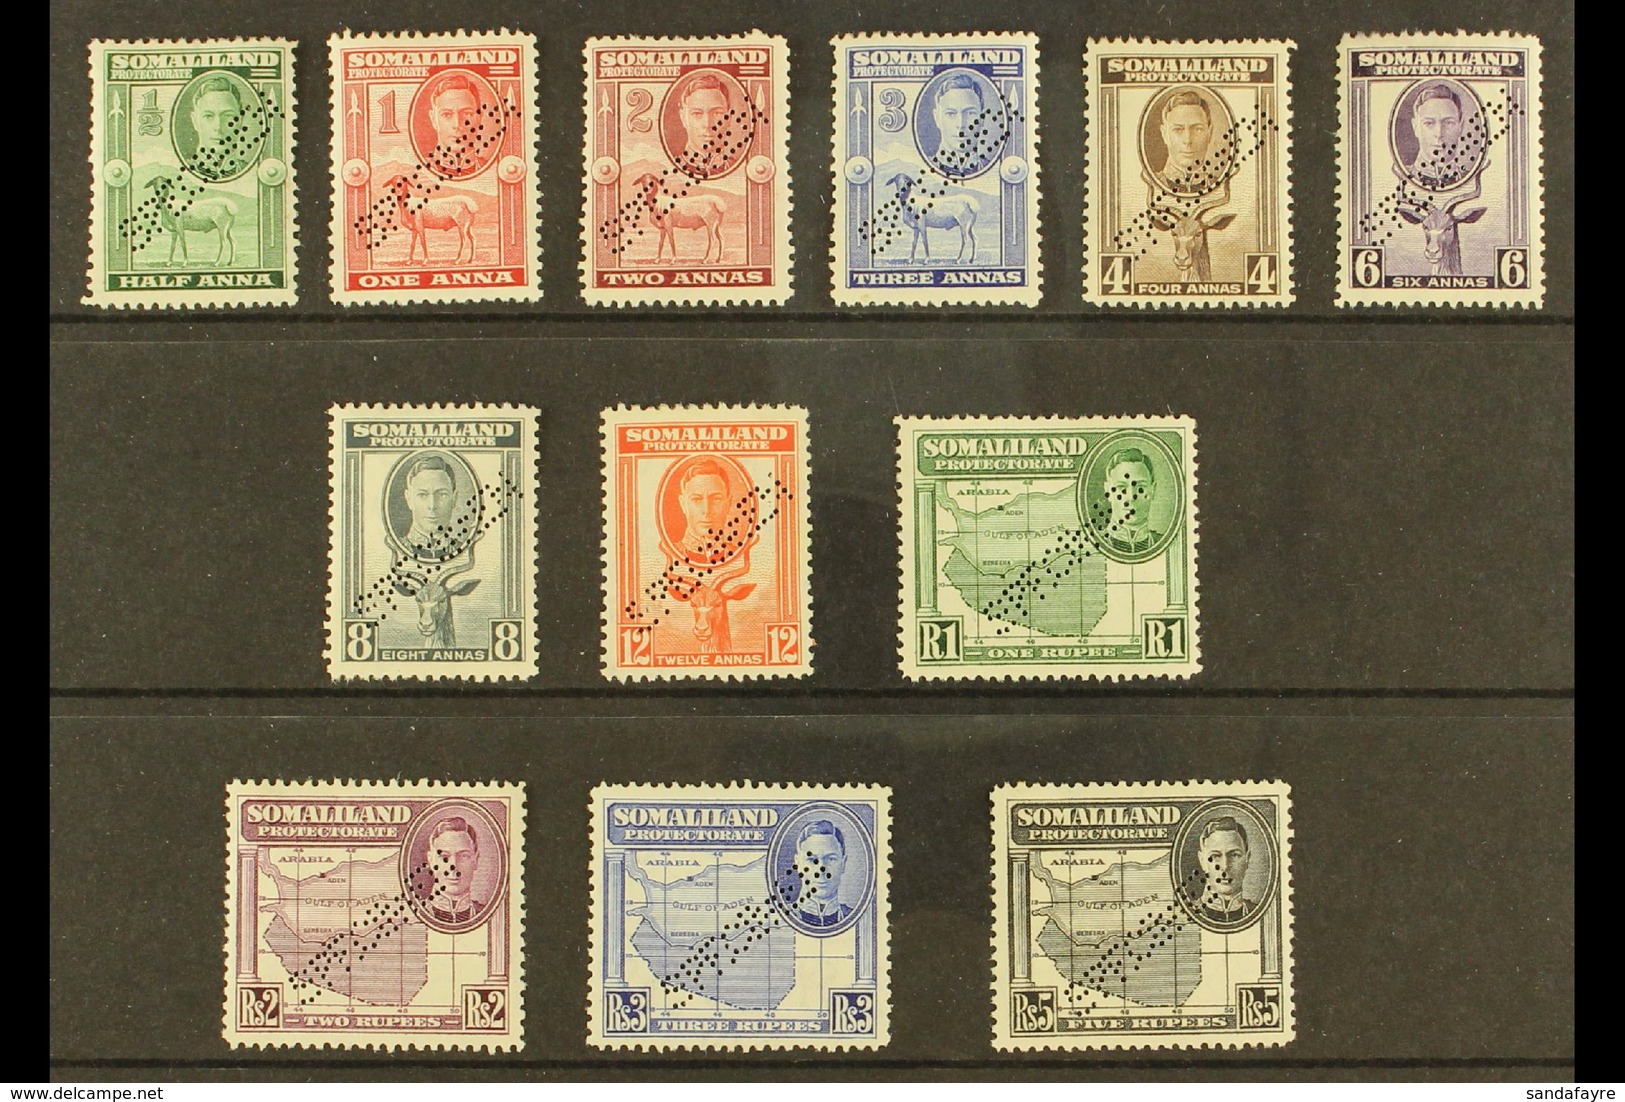 1942 Geo VI "full Face" Set Complete, Perforated "Specimen", SG 105s/15s, Very Fine Mint. (12 Stamps) For More Images, P - Somaliland (Protectorate ...-1959)